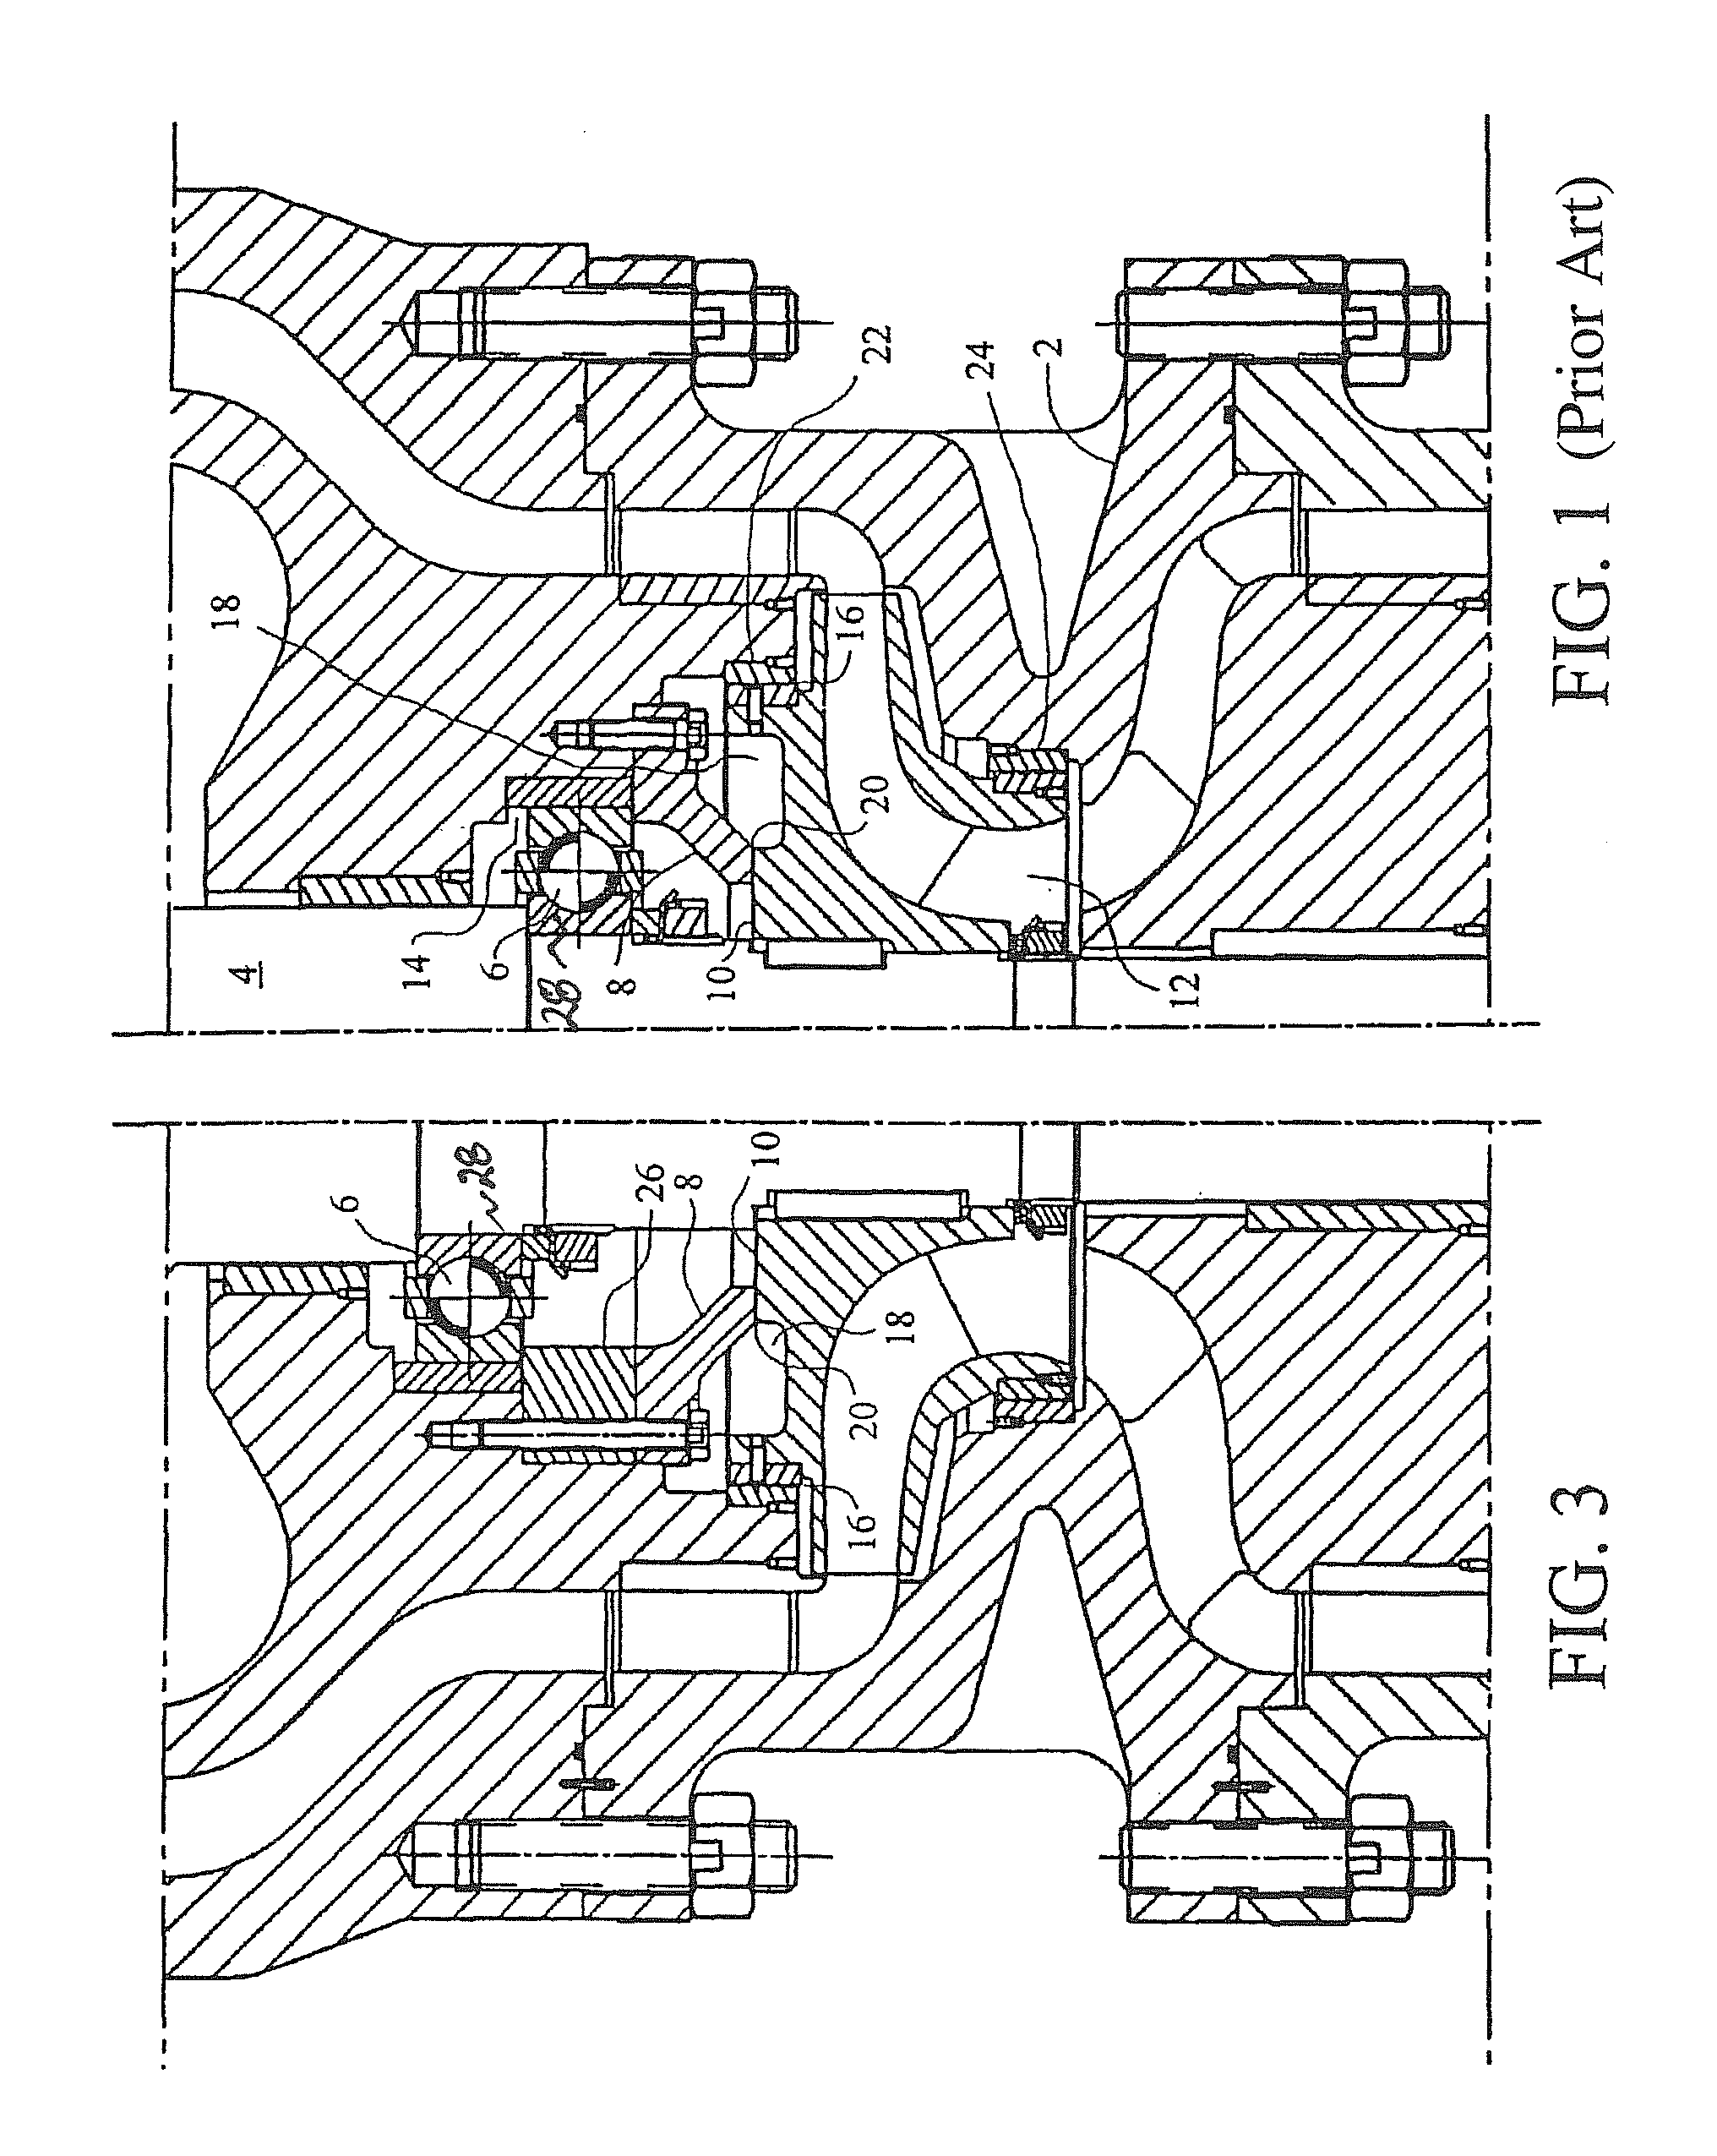 Thrust balancing device for cryogenic fluid machinery